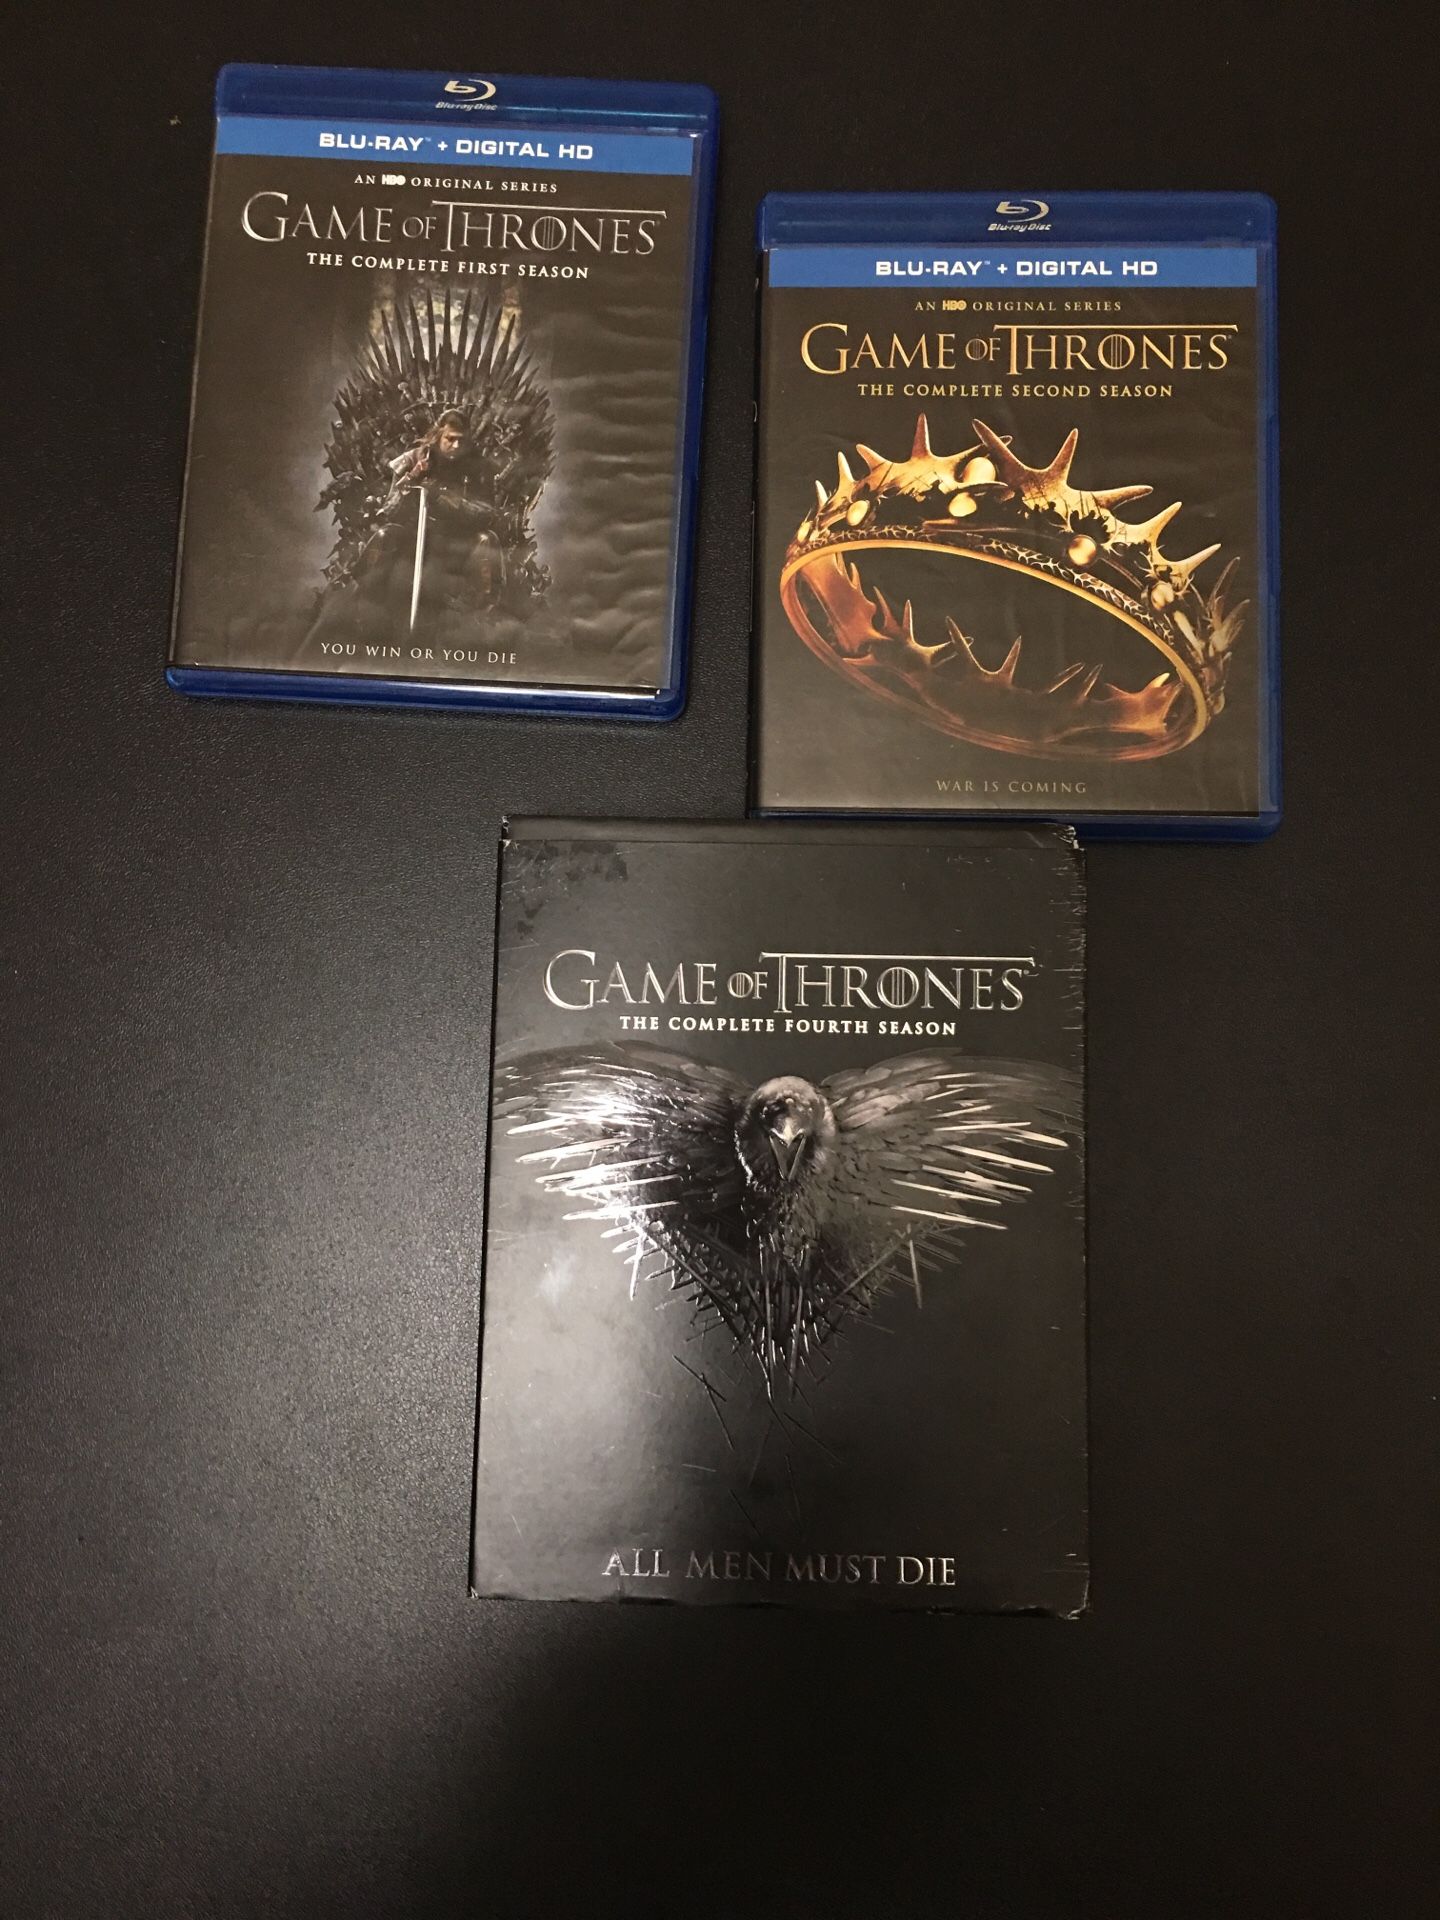 Game of Thrones - Blu-Ray Complete Seasons 1, 2, and 4